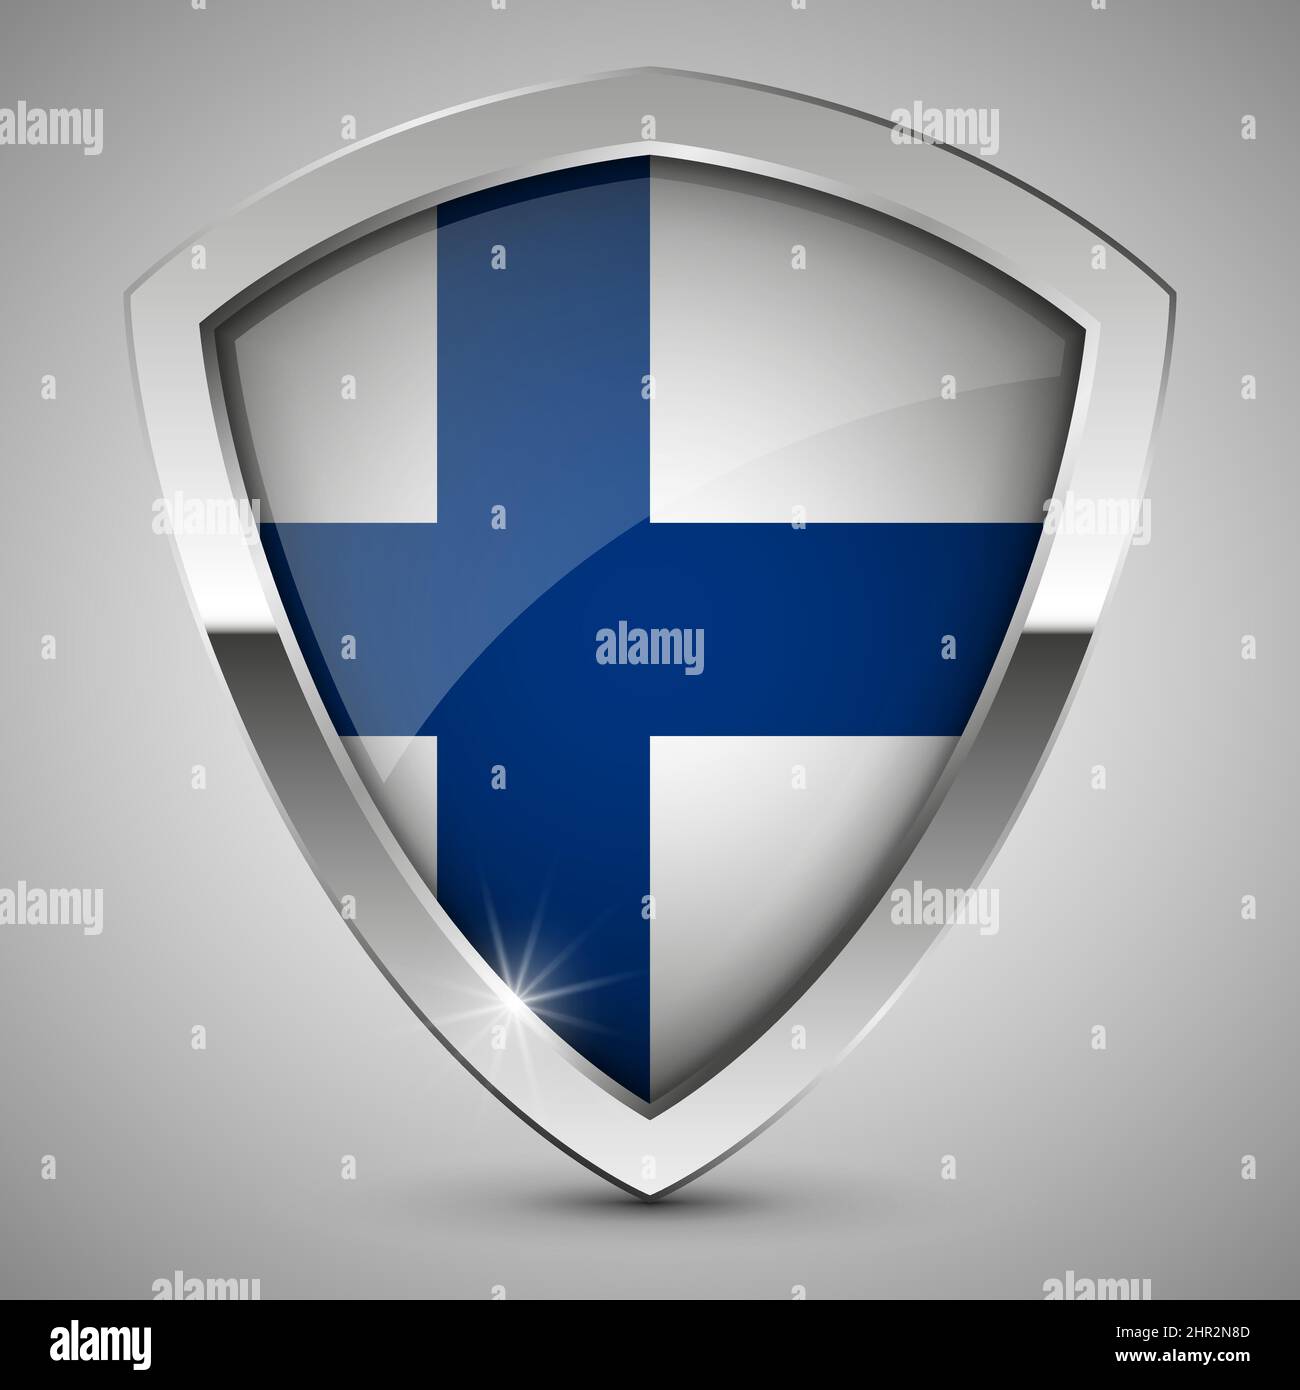 EPS10 Vector Patriotic shield with flag of Finland. An element of impact for the use you want to make of it. Stock Vector